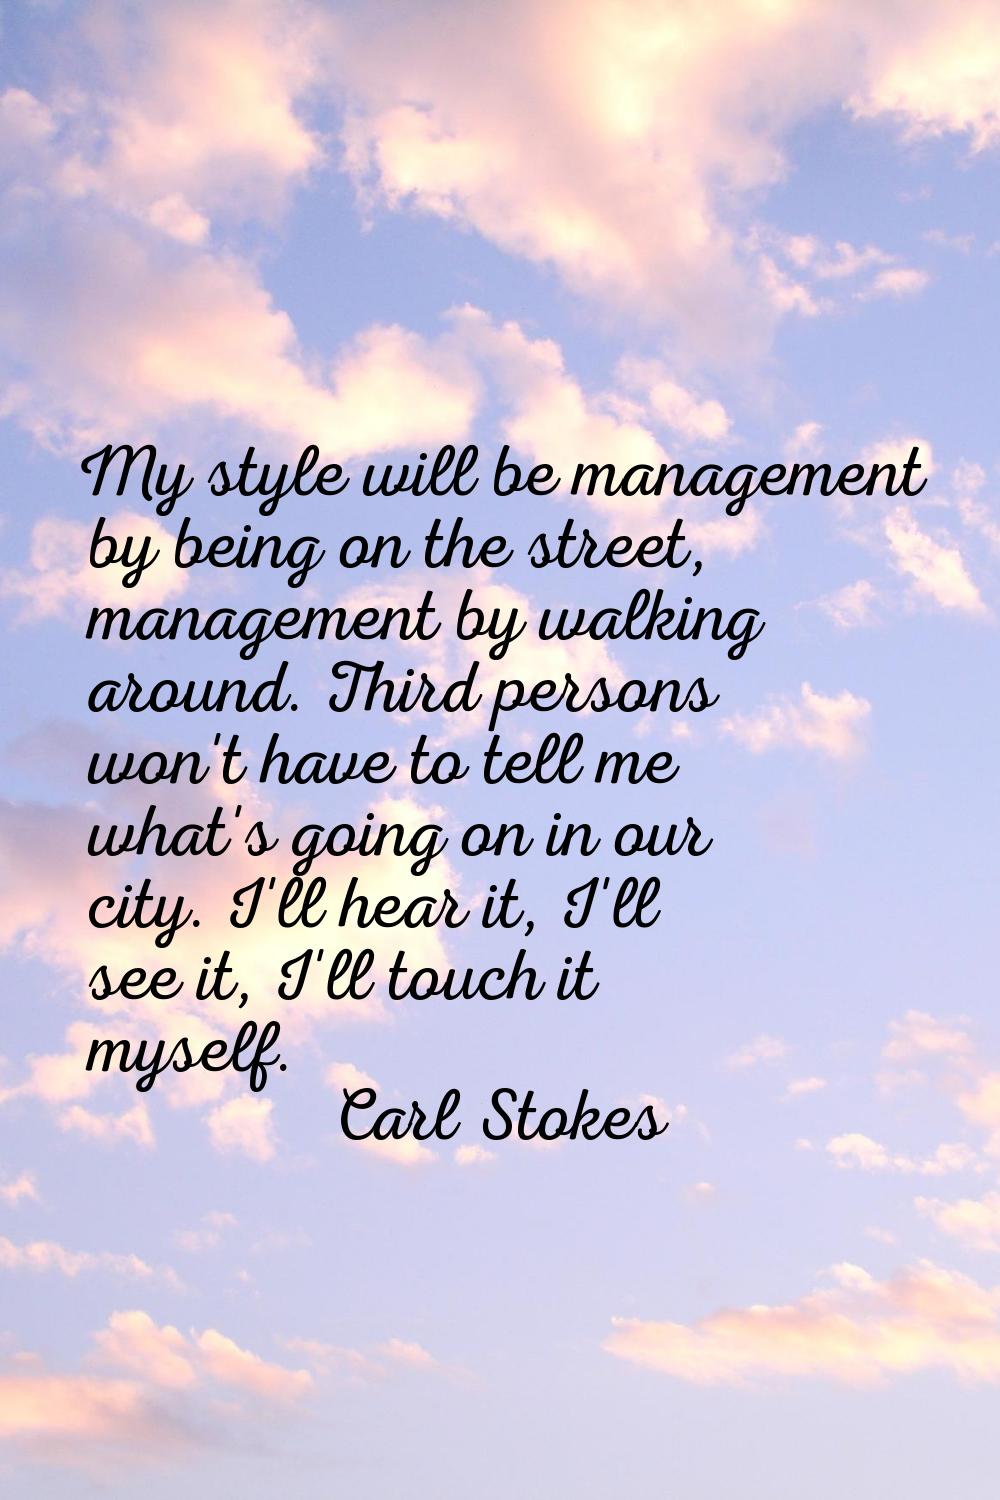 My style will be management by being on the street, management by walking around. Third persons won